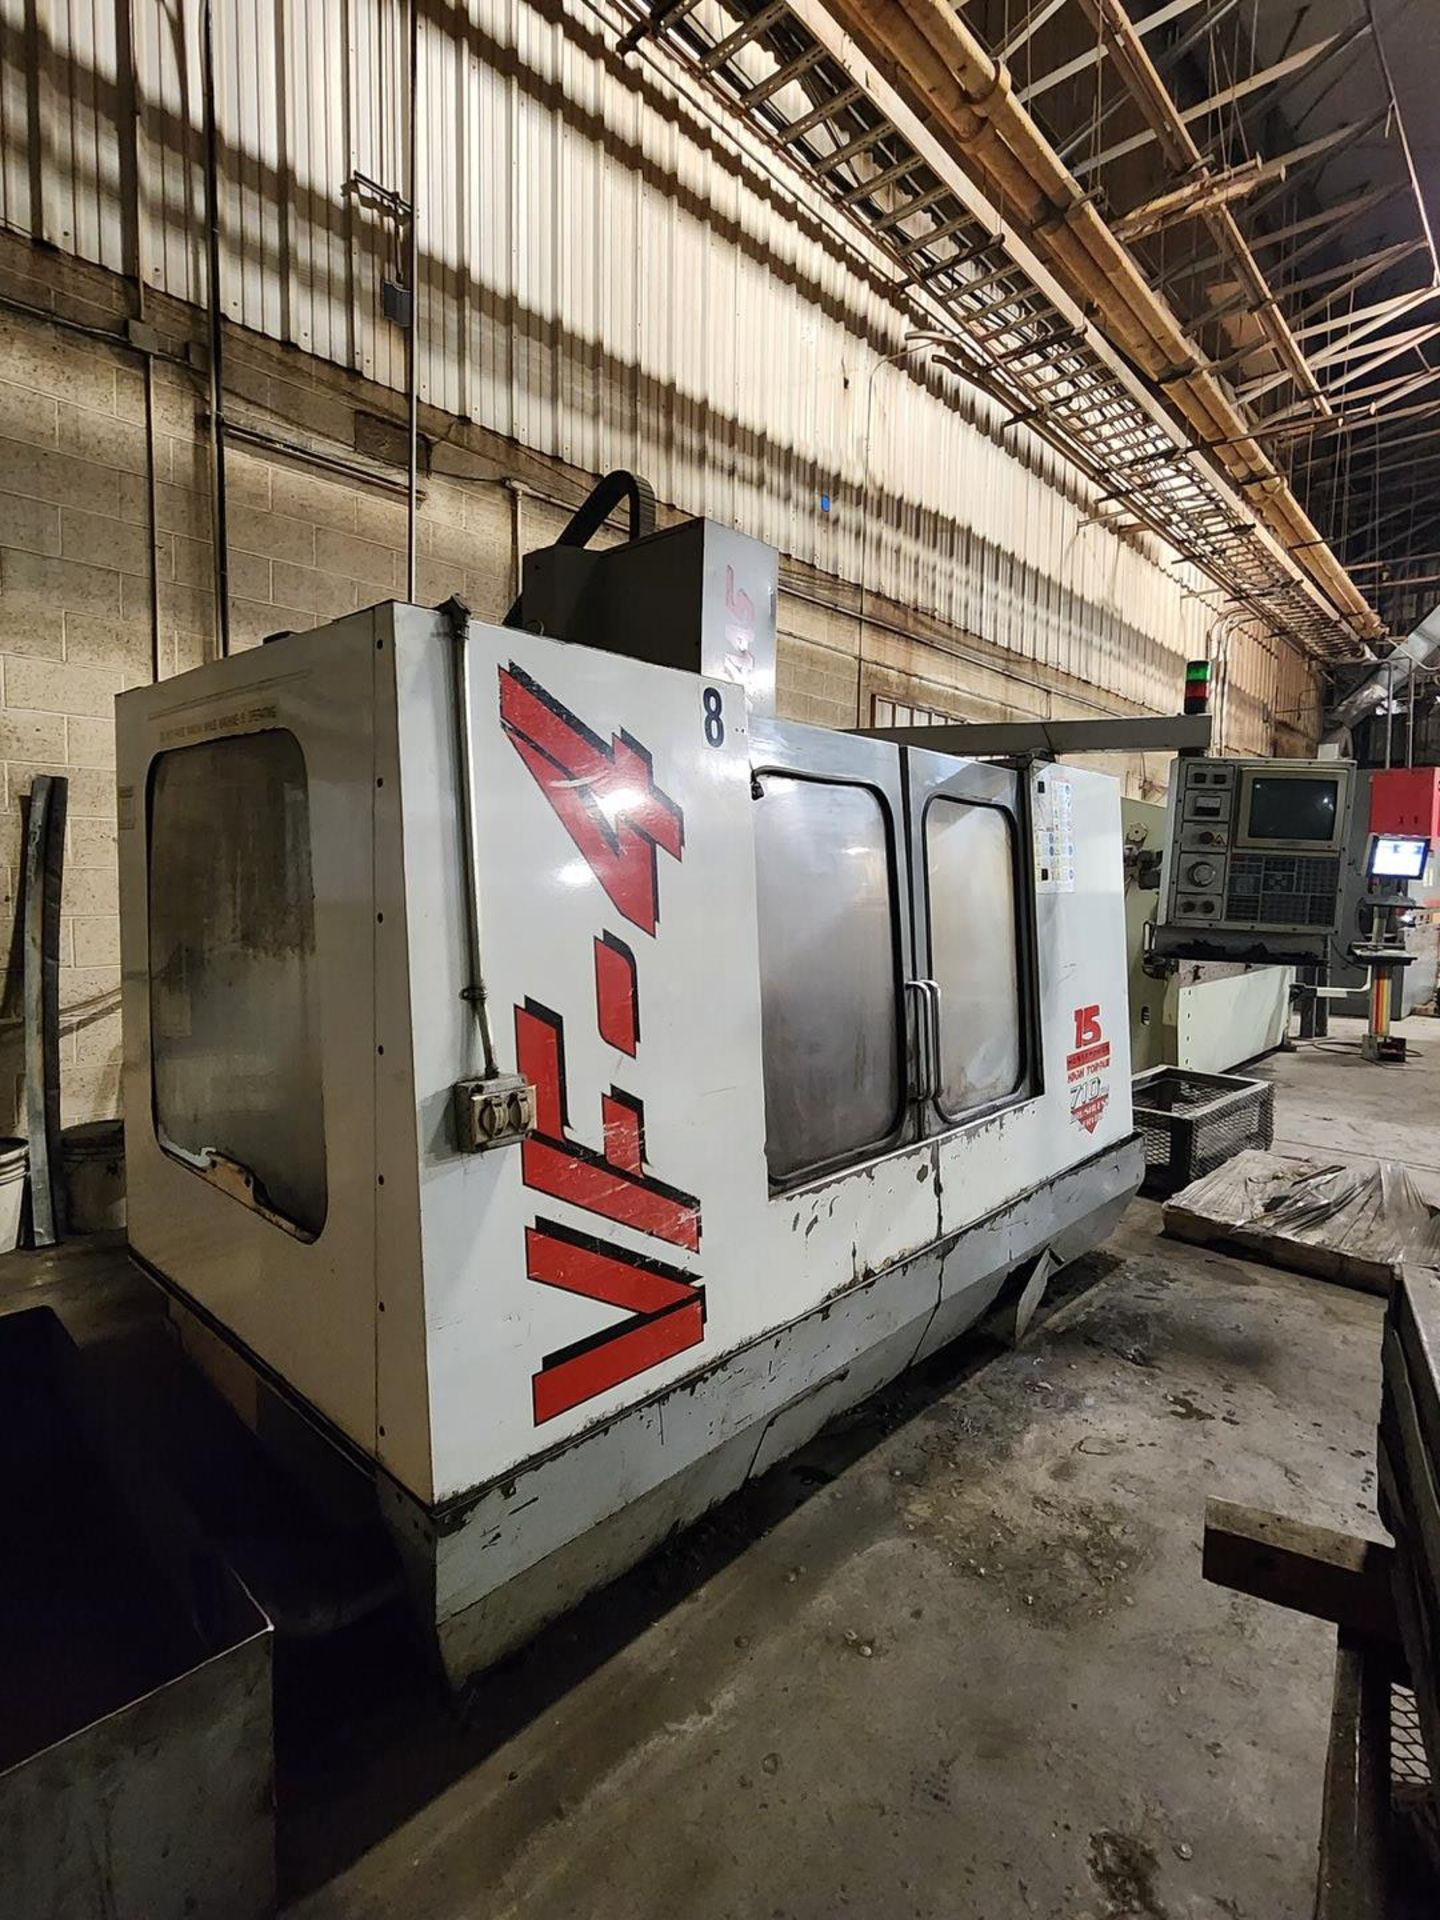 Haas 4 CNC Vertical Mill 3PH, 208/230V, 50/60HZ, Full Load: 40A, Longest Load: 30A, Interrupting - Image 2 of 15